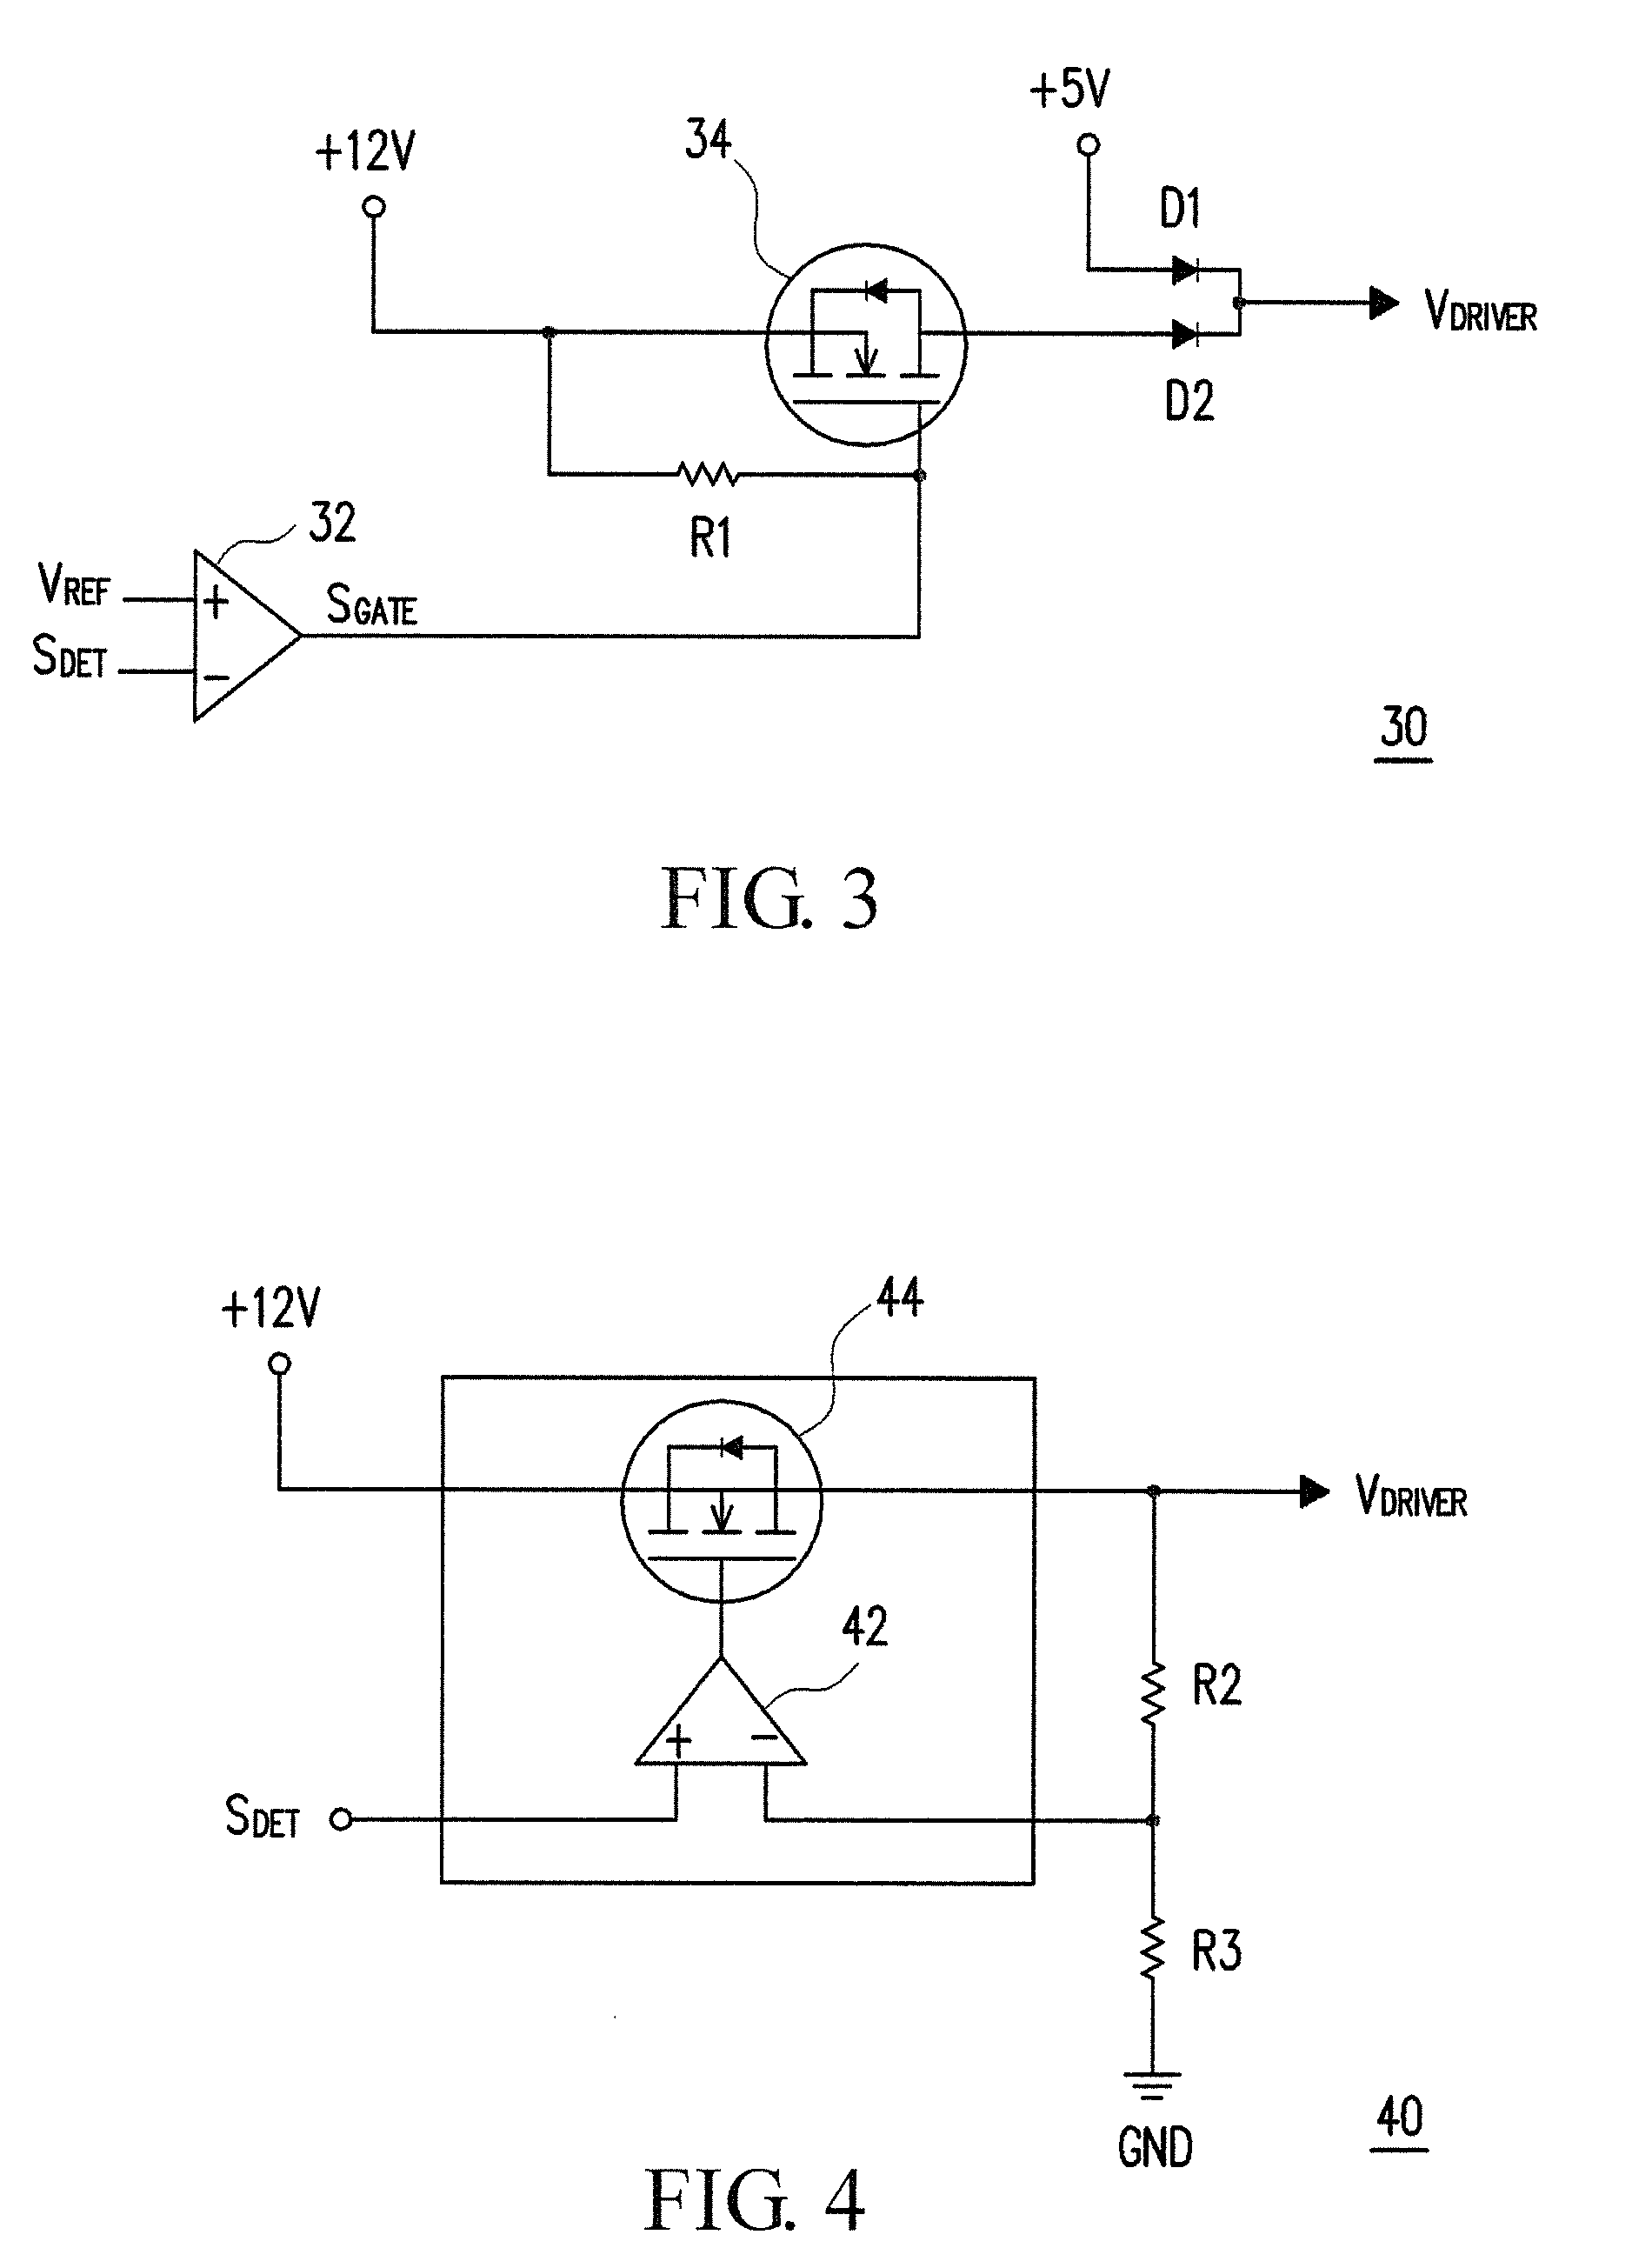 Apparatus for auto-regulating input power source of driver